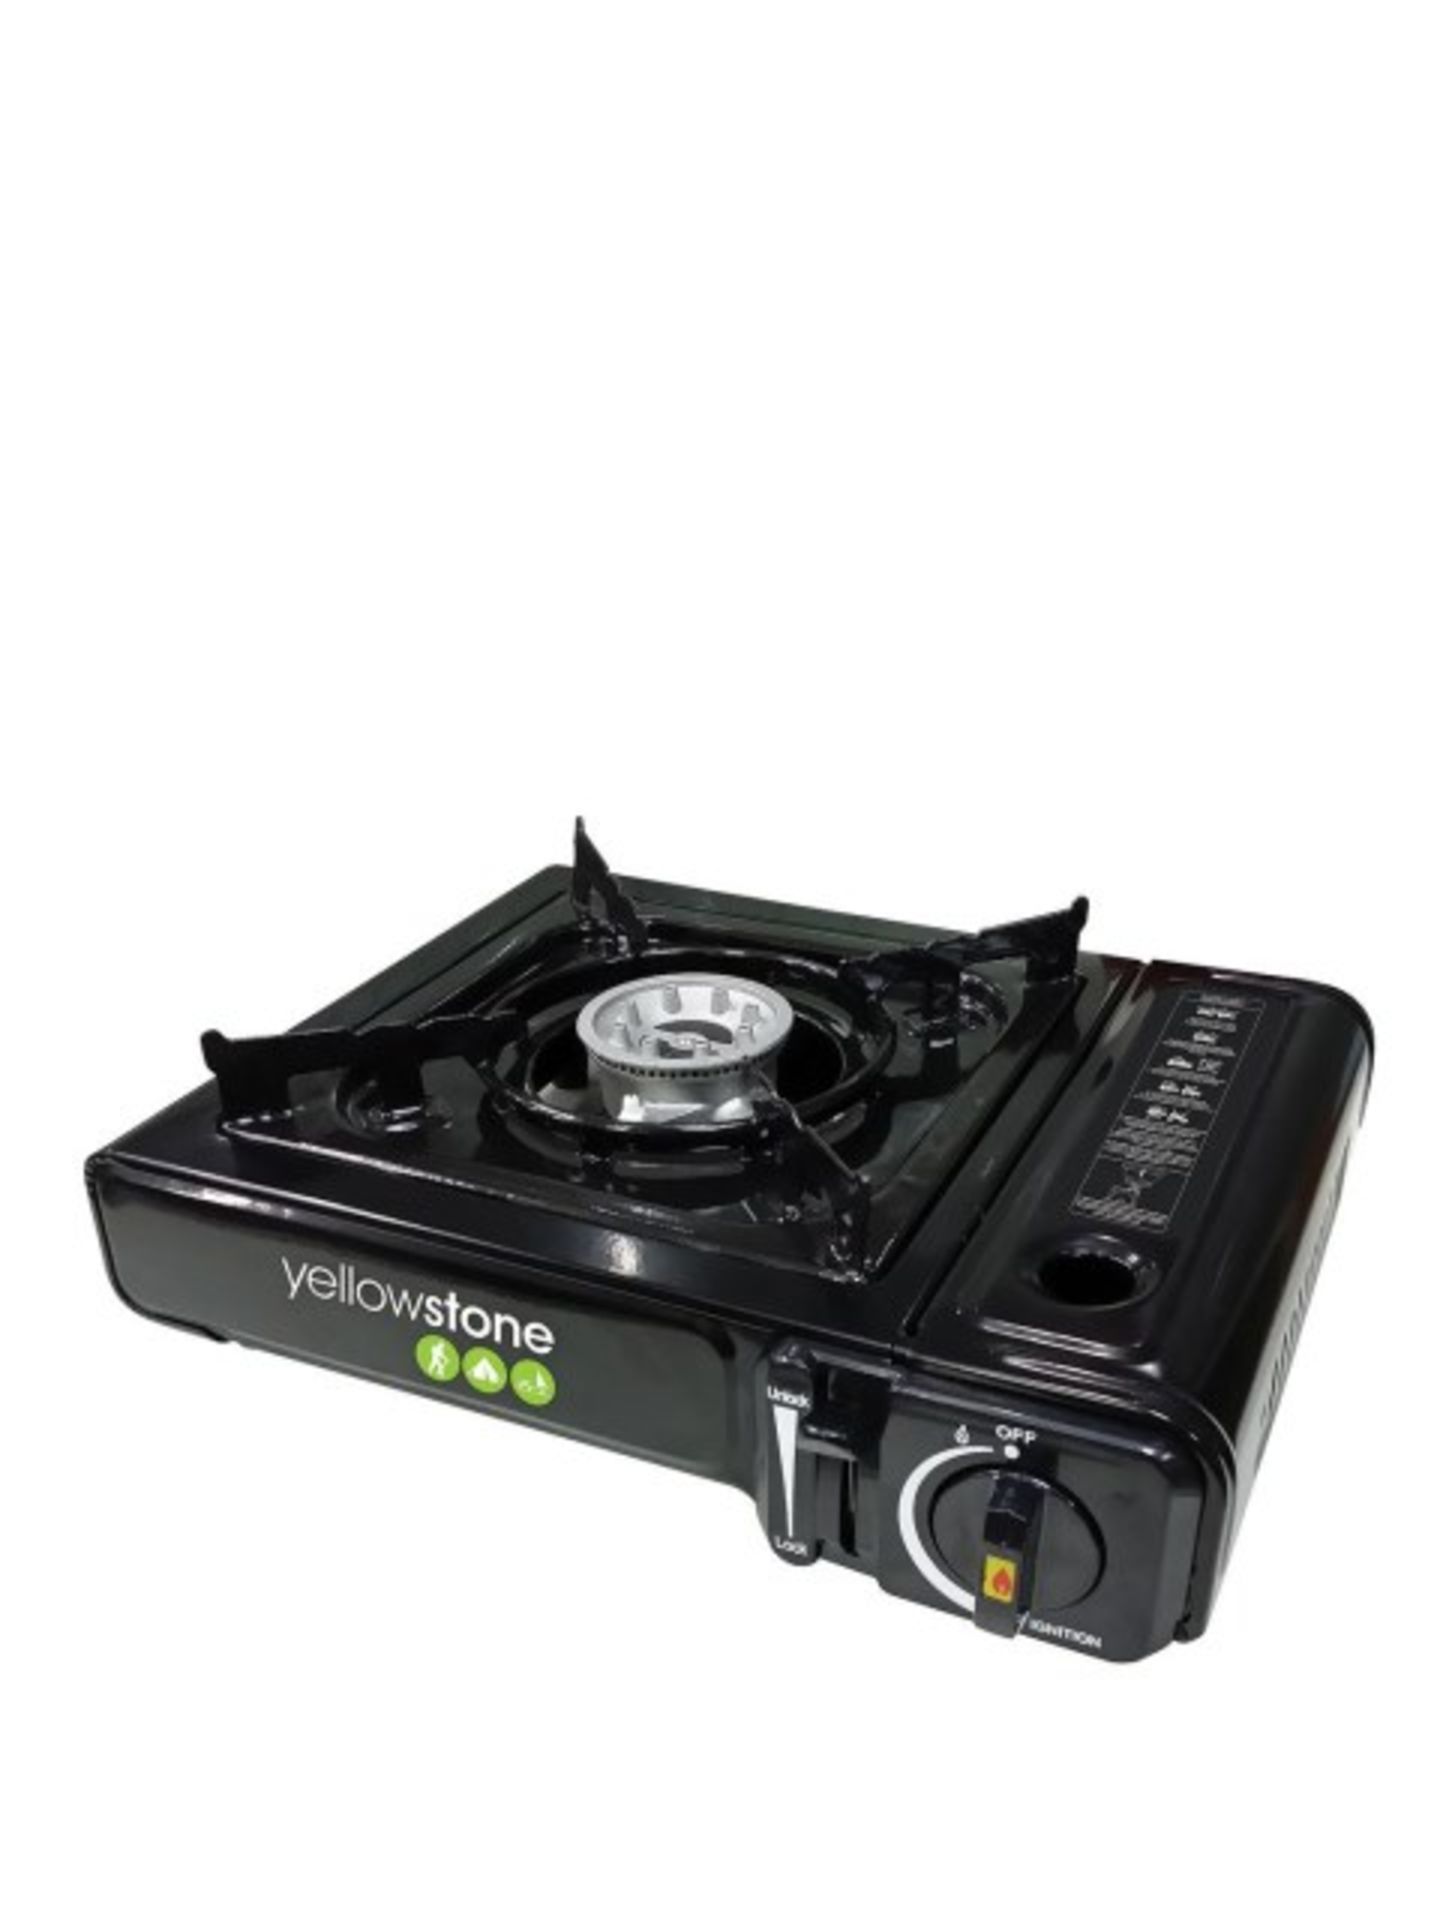 V Brand New Portable Gas Stove In Briefcase X 2 YOUR BID PRICE TO BE MULTIPLIED BY TWO